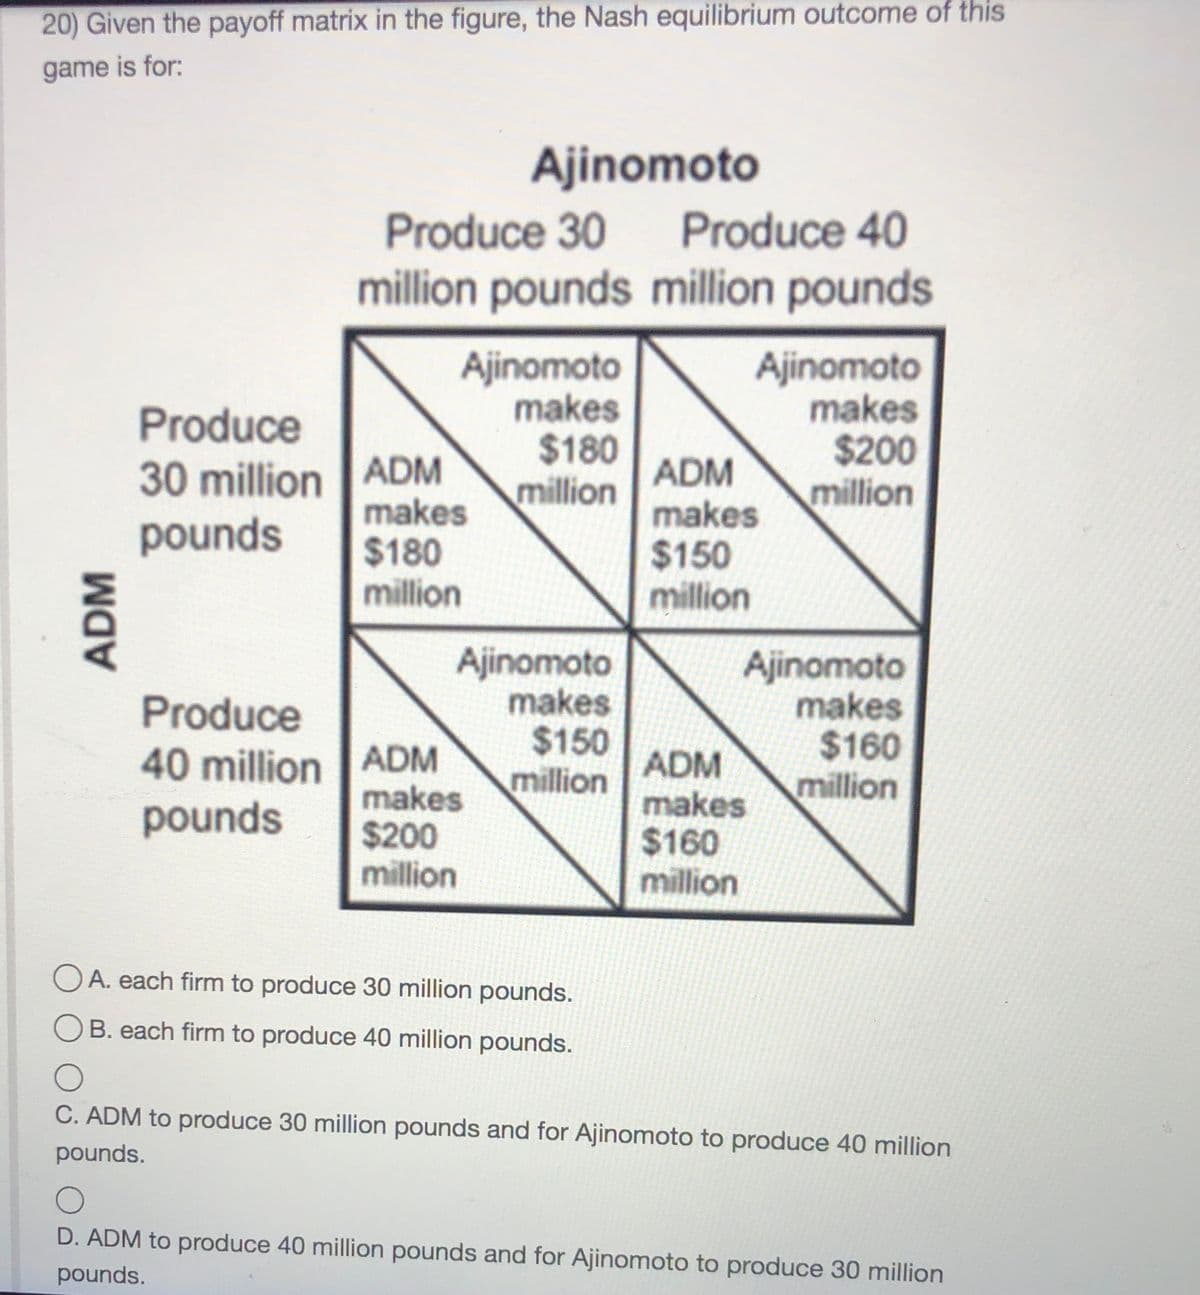 20) Given the payoff matrix in the figure, the Nash equilibrium outcome of this
game is for:
Ajinomoto
Produce 30
Produce 40
million pounds million pounds
Ajinomoto
makes
$180
million
Ajinomoto
makes
$200
million
Produce
30 million ADM
makes
$180
million
ADM
makes
$150
million
pounds
Ajinomoto
makes
$150
million
Ajinomoto
makes
$160
million
Produce
40 million ADM
makes
$200
million
ADM
makes
$160
million
pounds
O A. each firm to produce 30 million pounds.
B. each firm to produce 40 million pounds.
C. ADM to produce 30 million pounds and for Ajinomoto to produce 40 million
pounds.
D. ADM to produce 40 million pounds and for Ajinomoto to produce 30 million
pounds.
ADM
